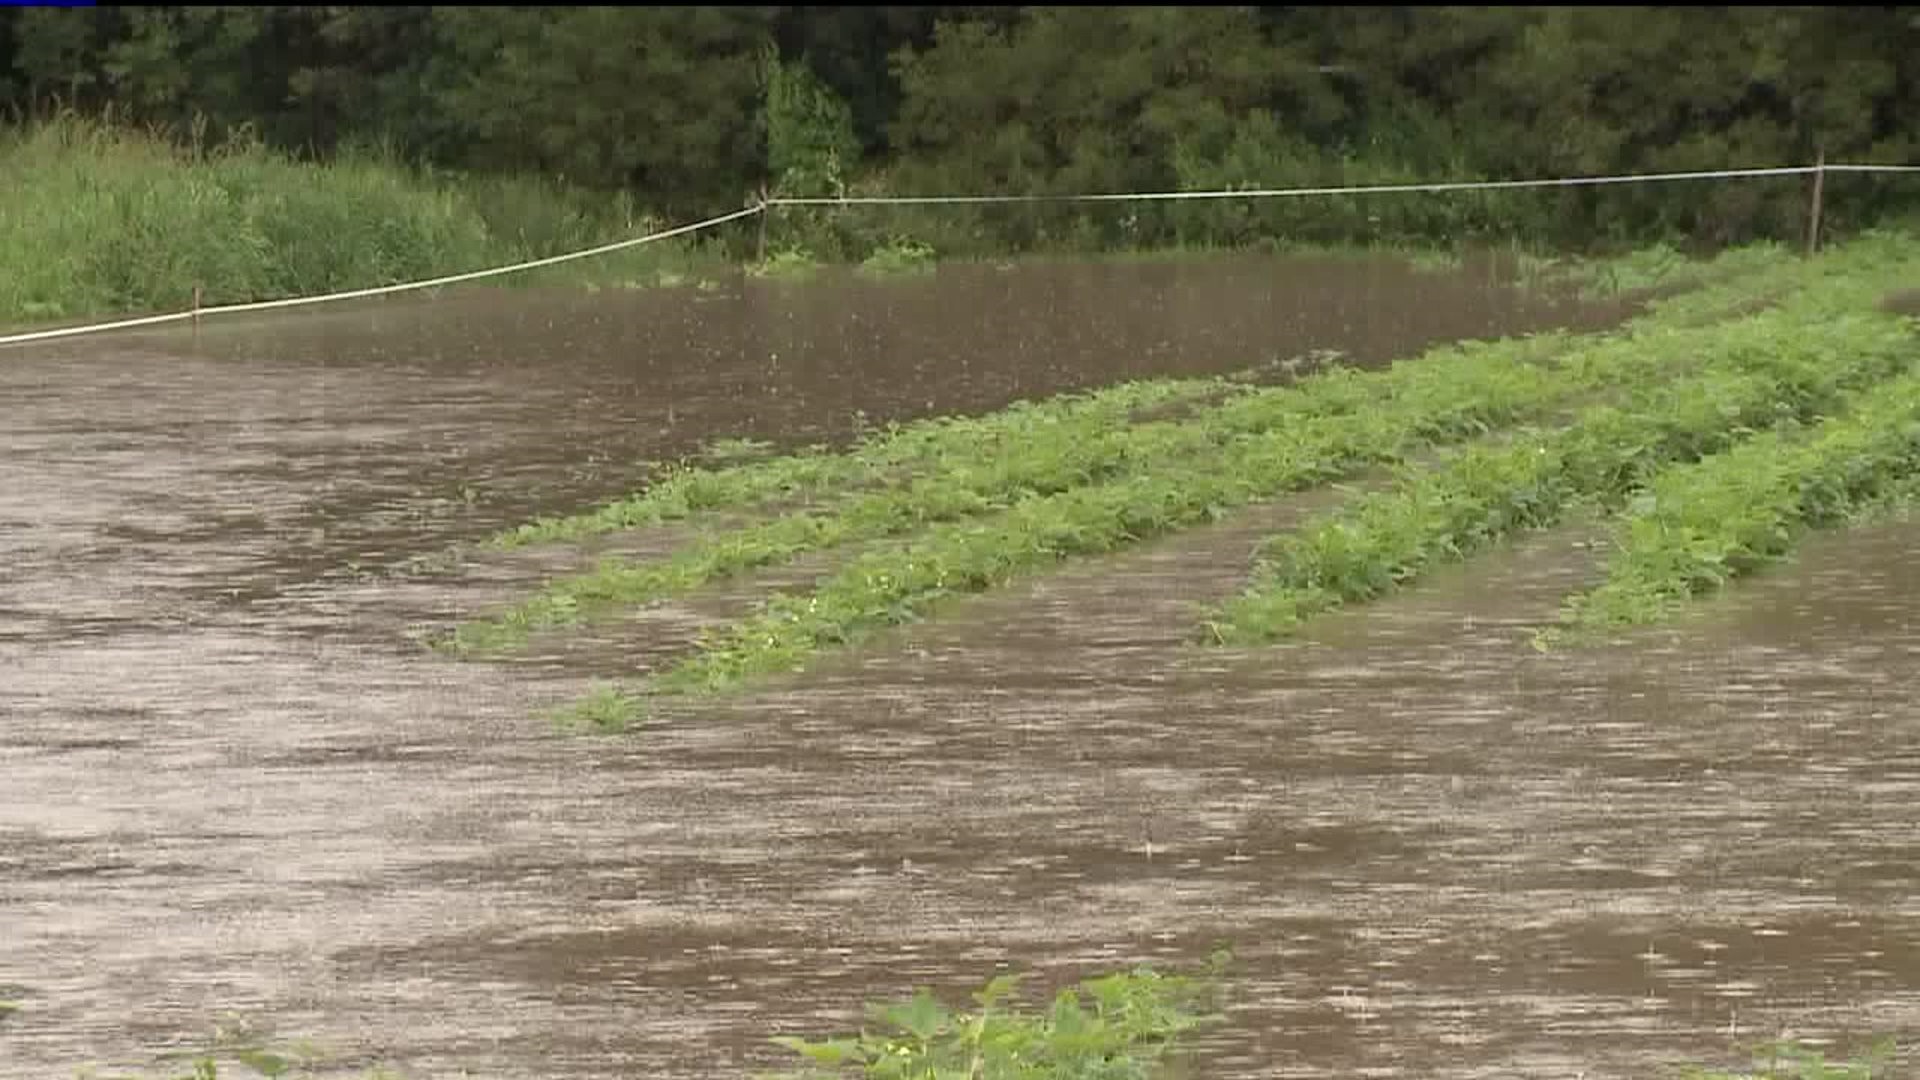 As River Level Rises, Farmers Rush to Save Crops